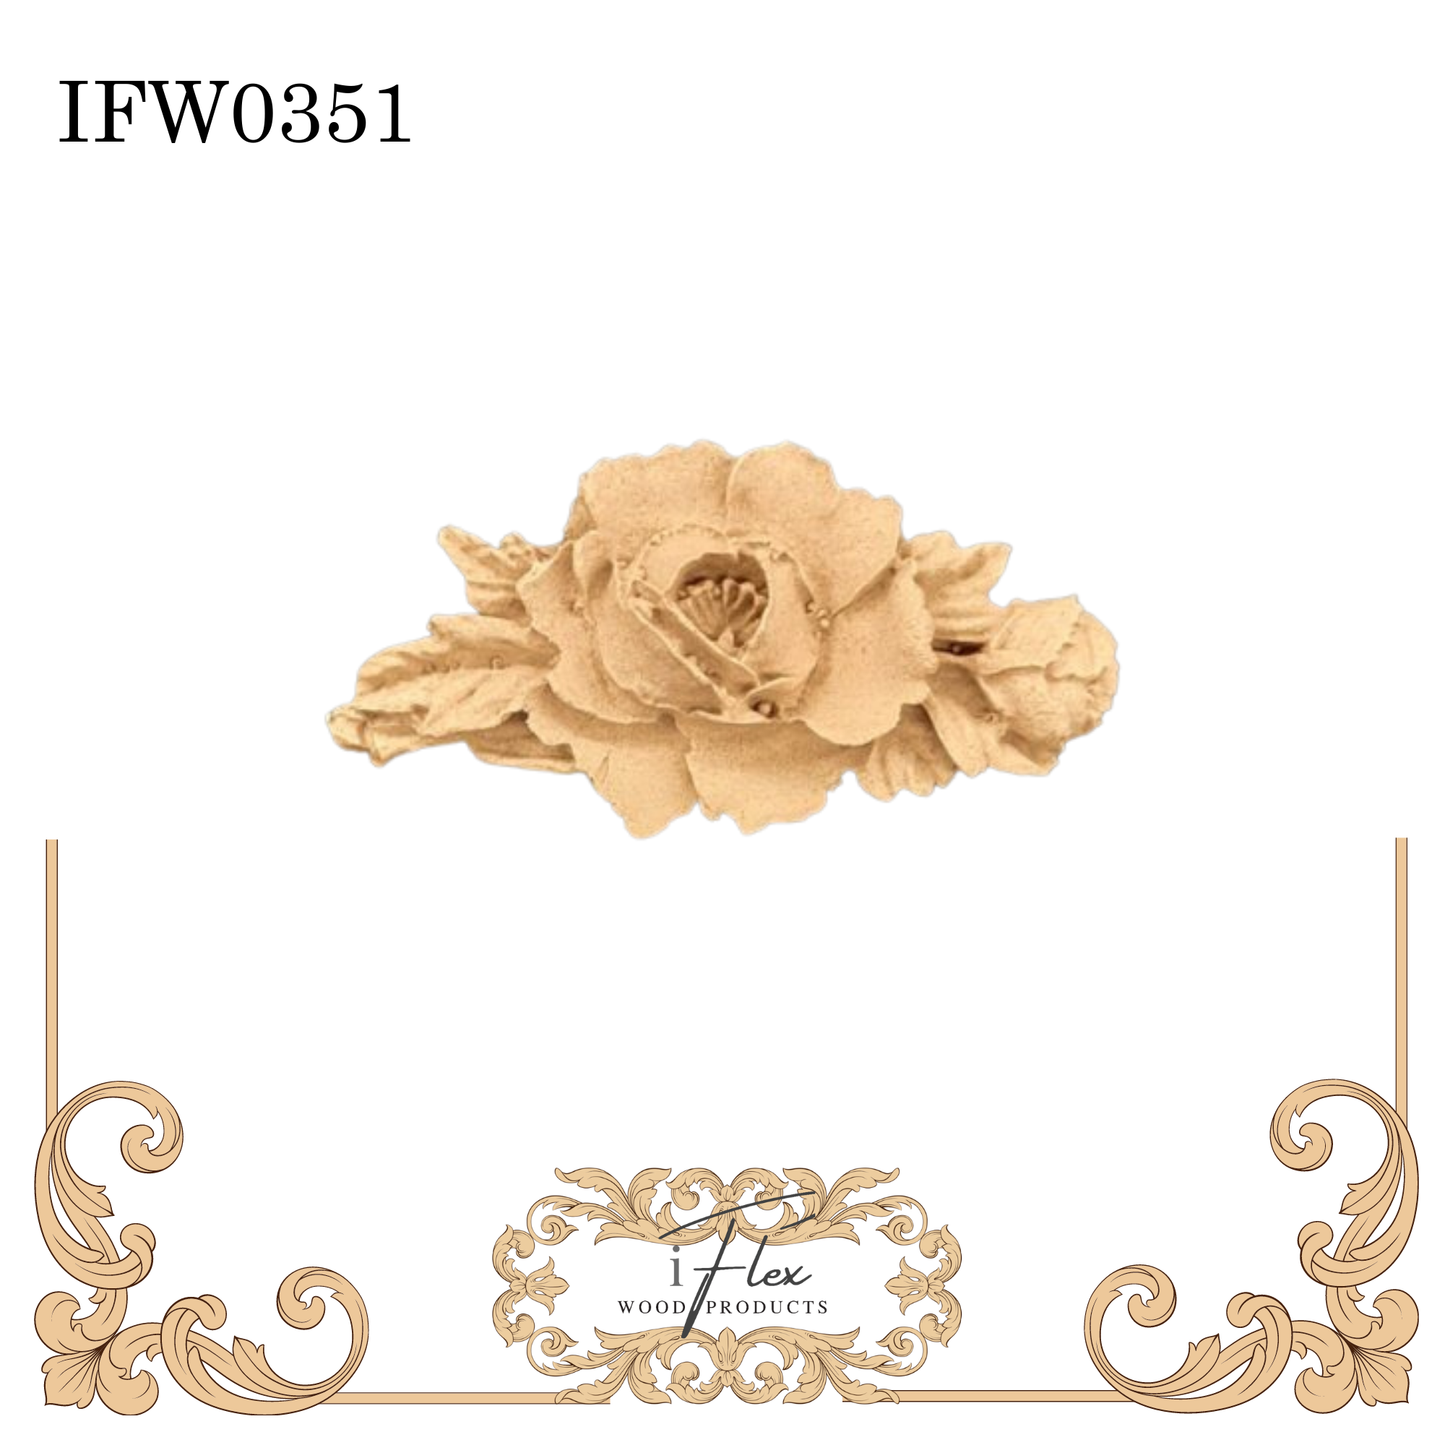 IFW 0351  iFlex Wood Products Flower bendable mouldings, flexible, wooden appliques